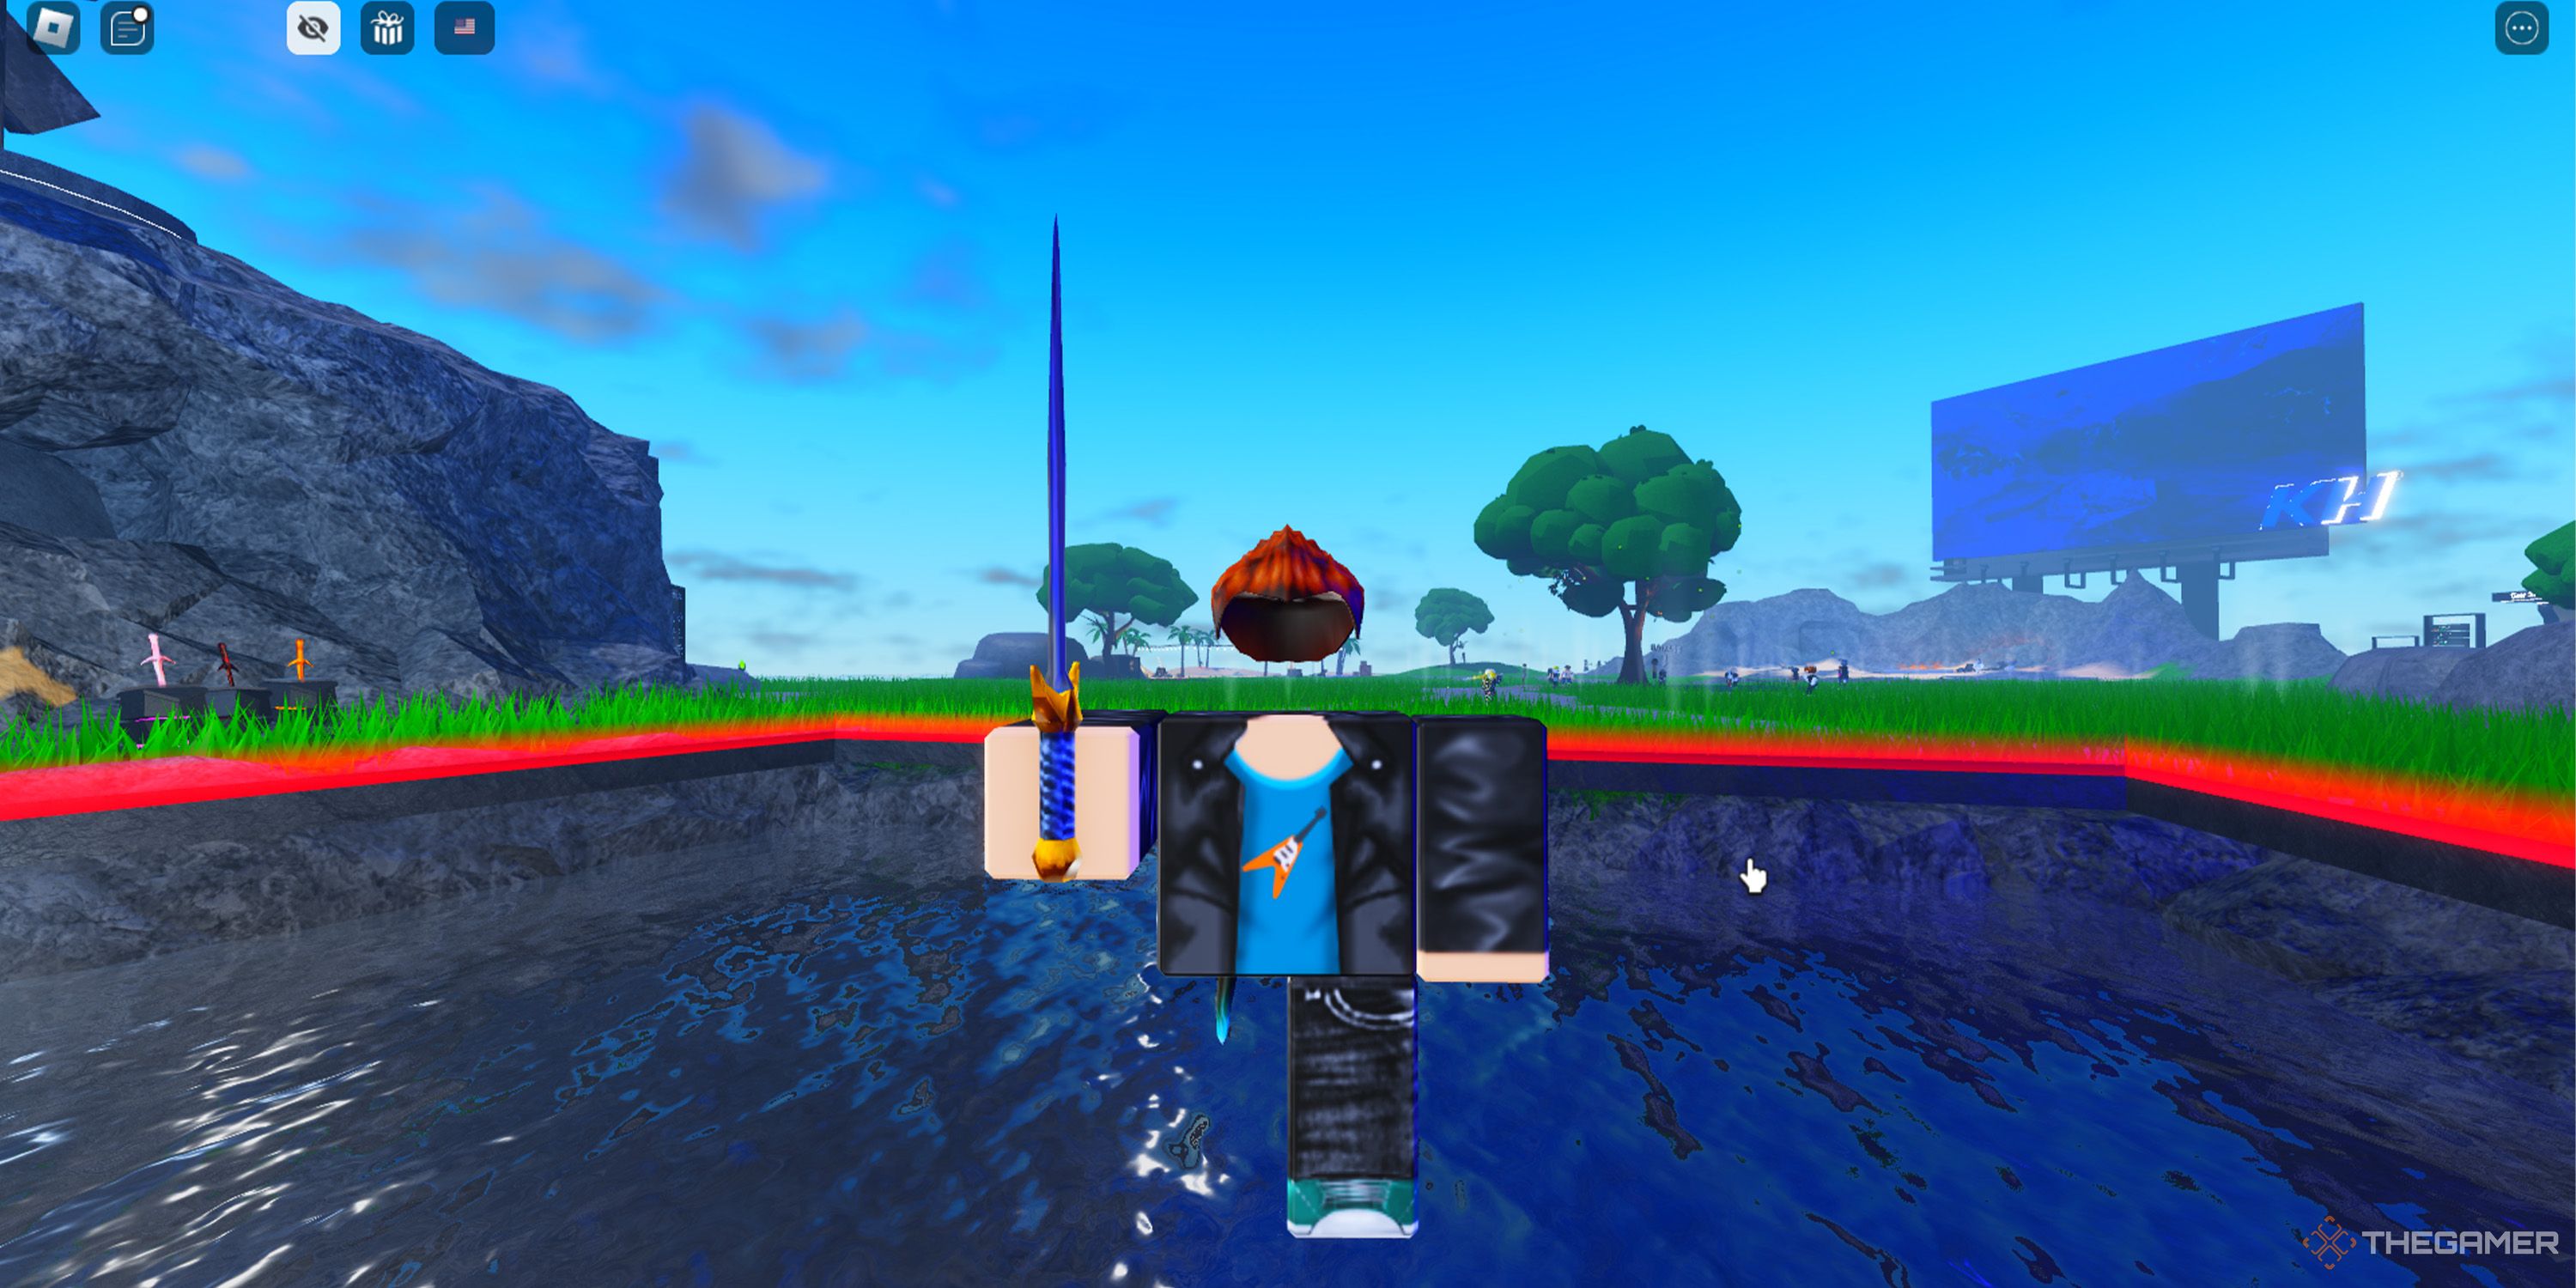 A headless Roblox character with one leg holds a sword inside a reflective pool-themed battle arena in Korblox And Headless Hangout.